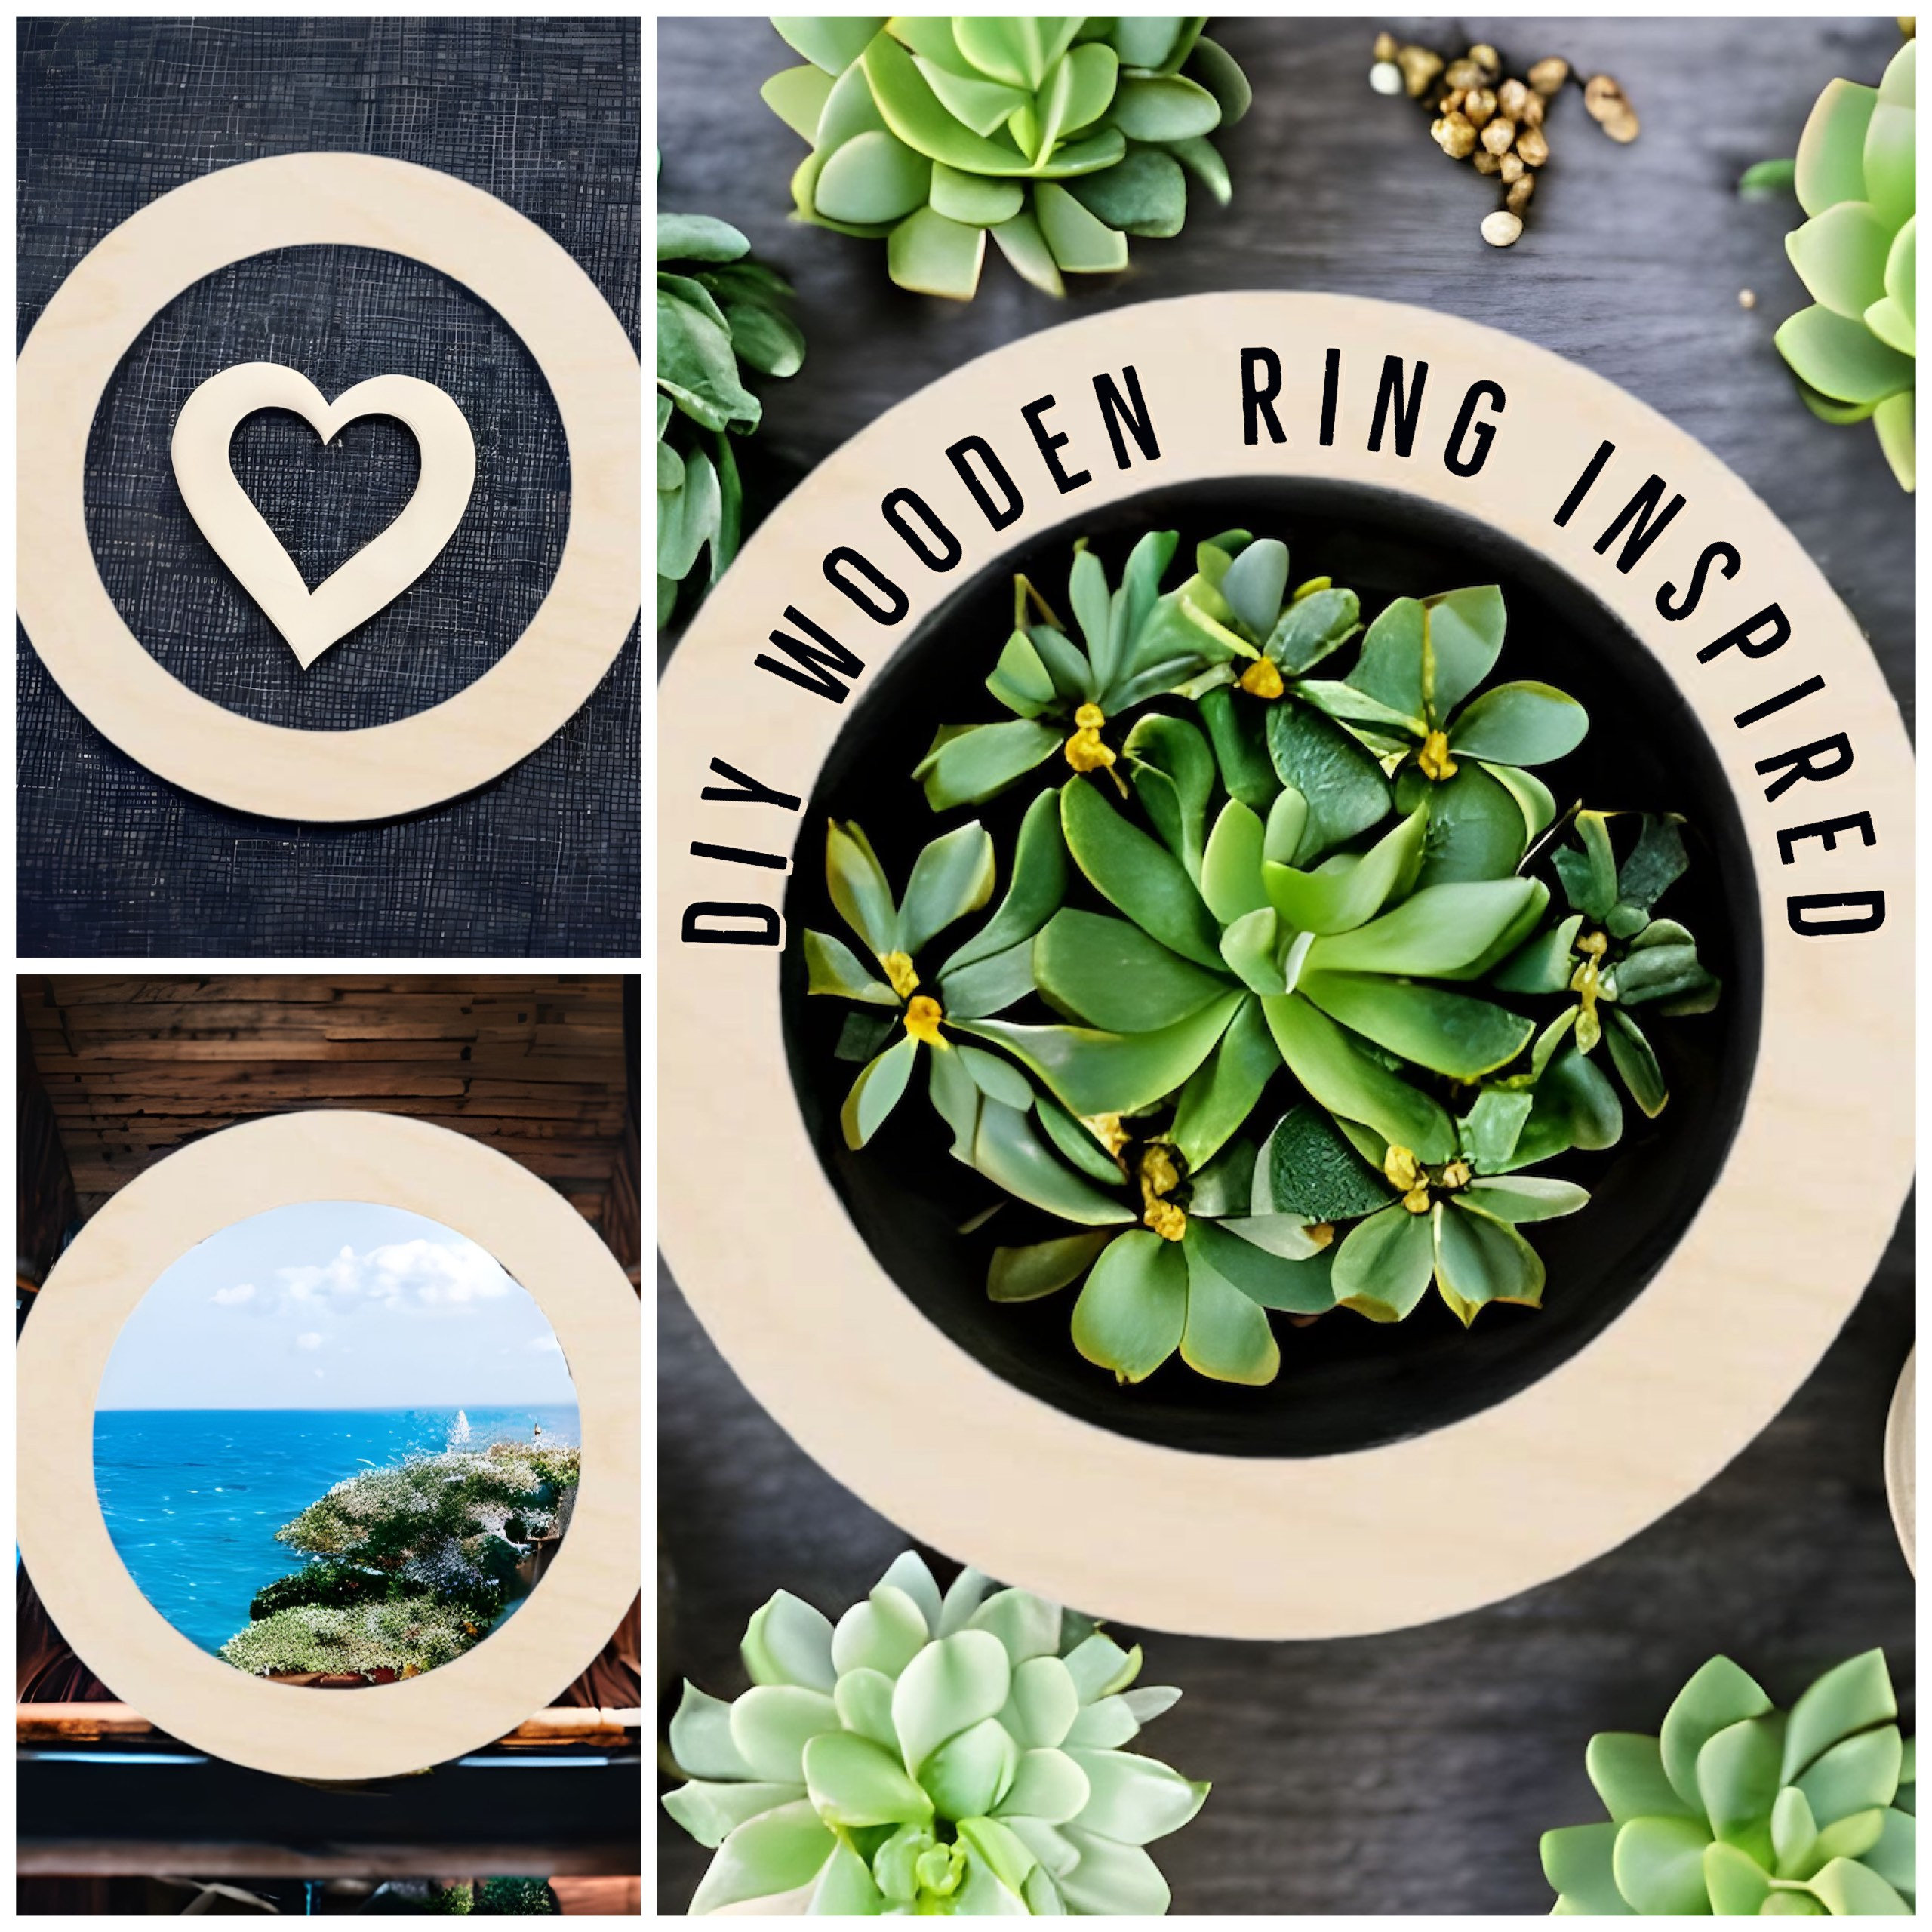 Wooden Ring Cutout - Wood Ring Craft